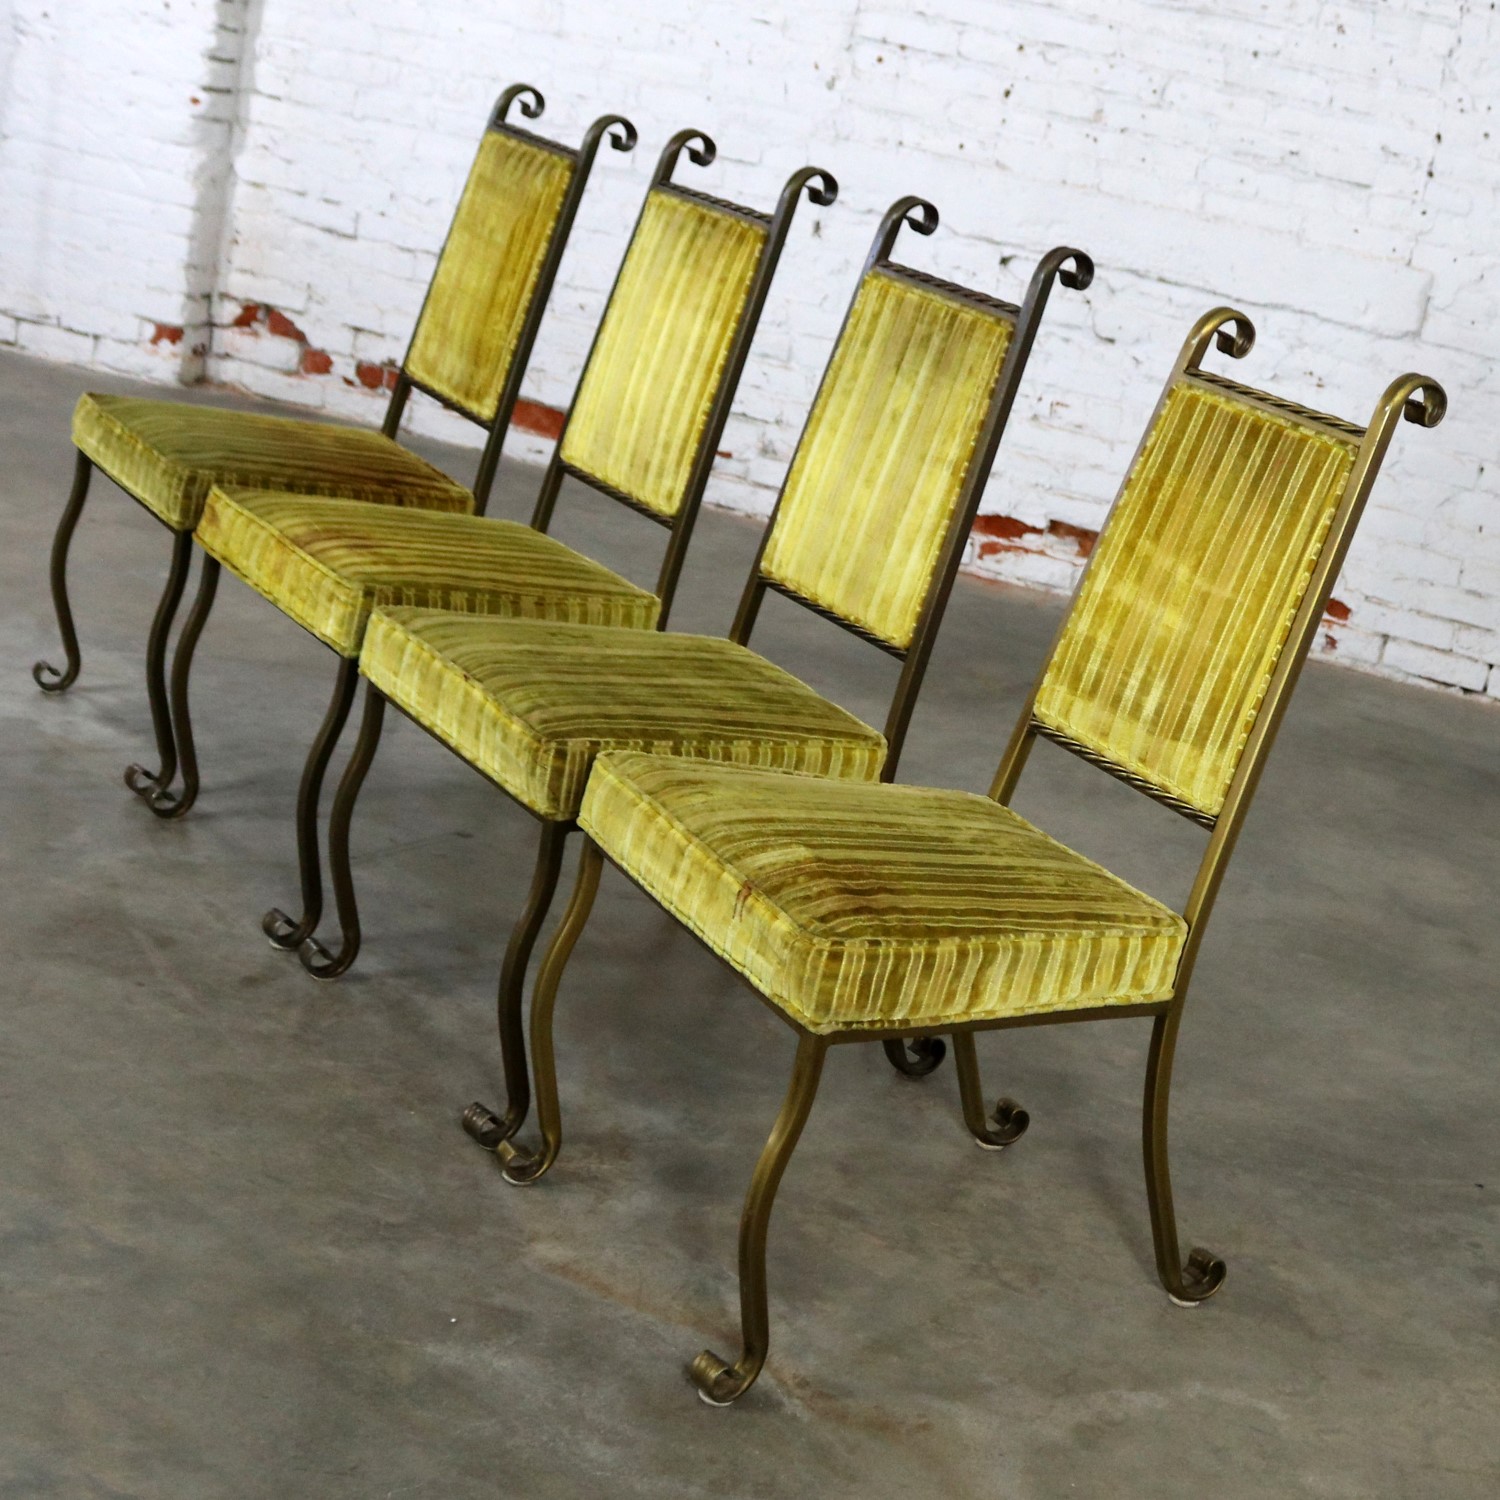 Four Hollywood Regency Wrought Iron Dining Chairs by Swirl Craft of Sun Valley